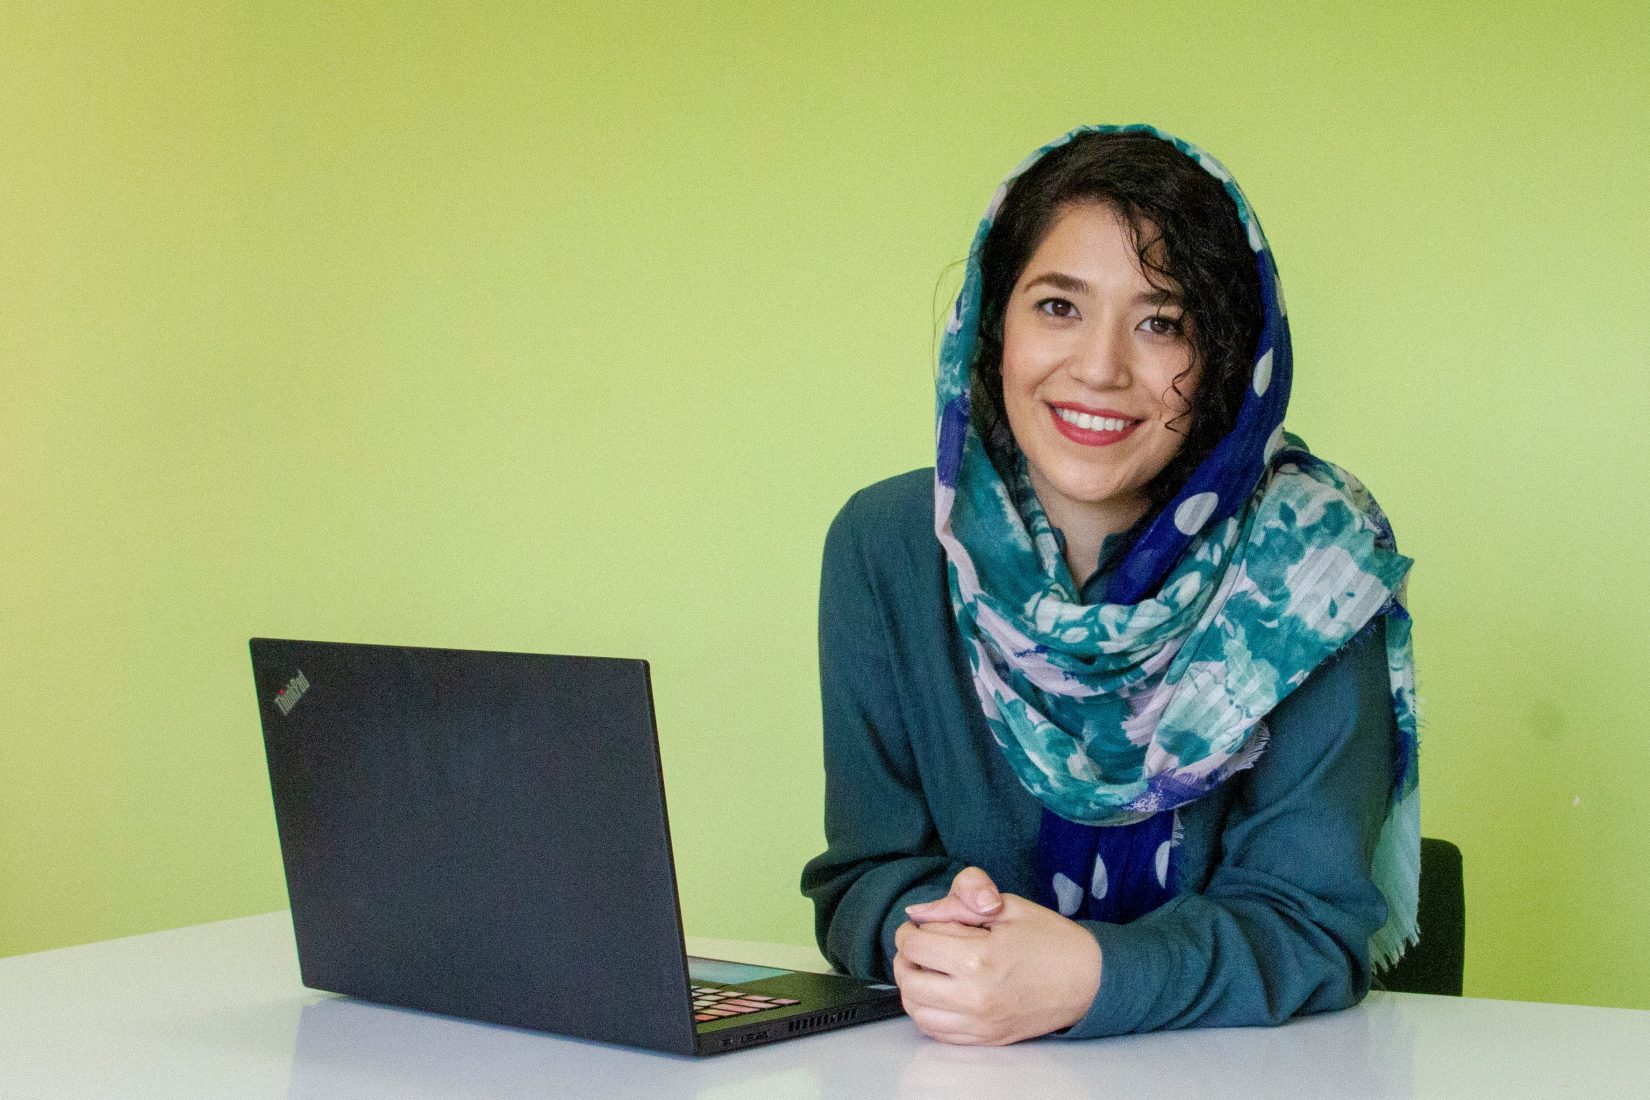 A woman sitting in front of a laptop, wearing a green jacket and a shawl aorund her hair.